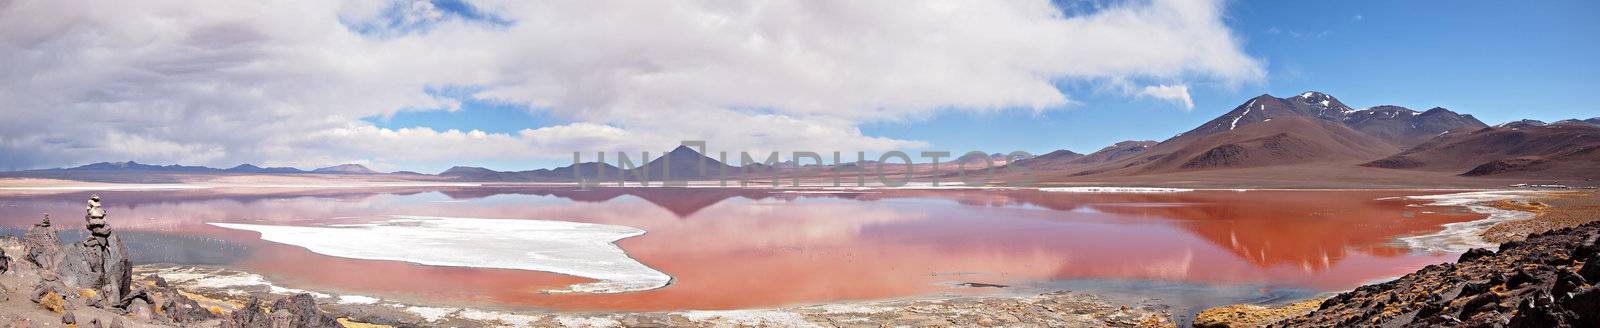 Panorama Red Lagoon, Bolivia by pljvv